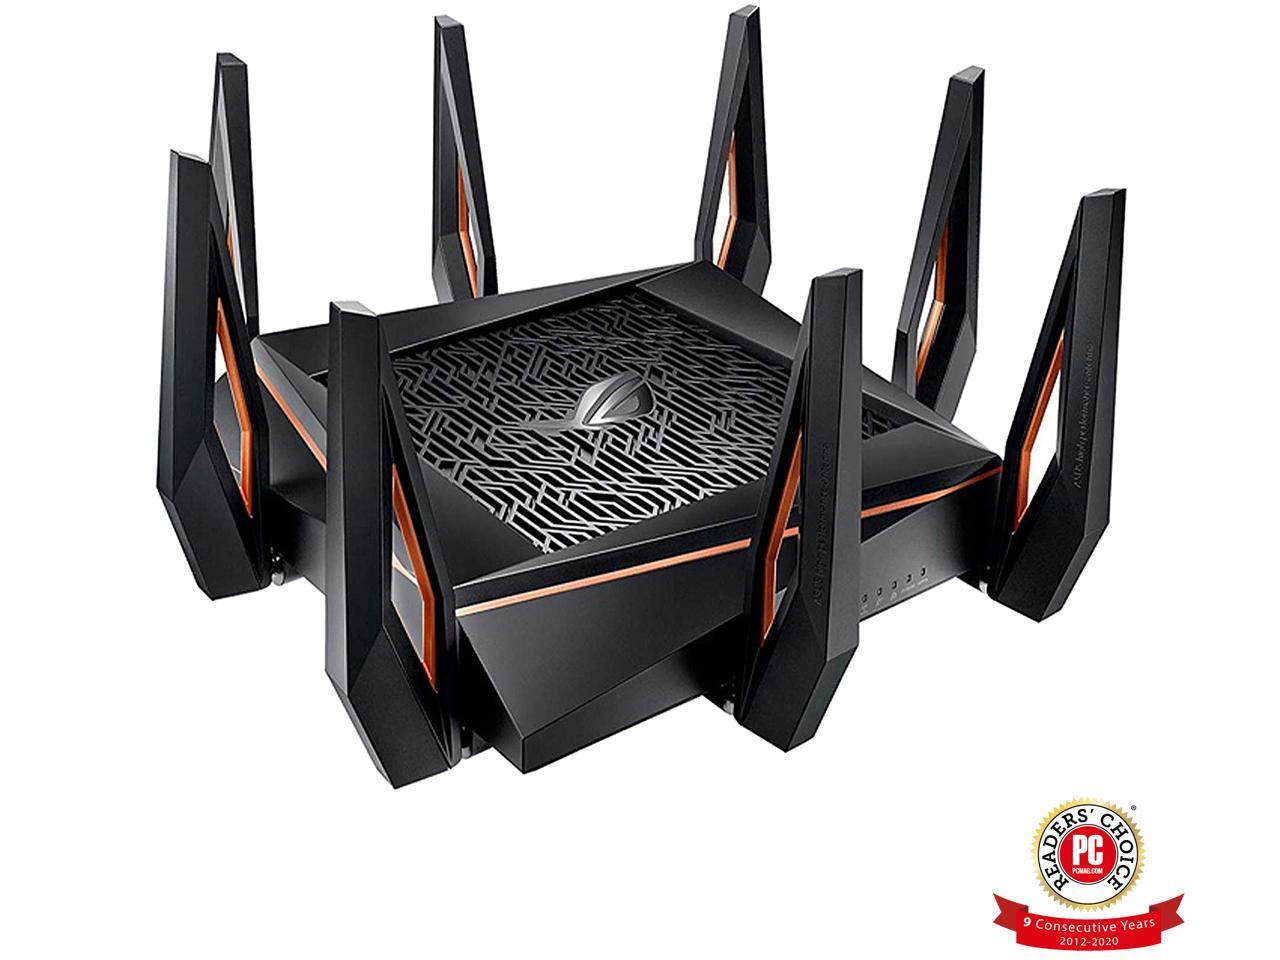 ASUS ROG Rapture GT-AX11000 AX11000 Tri-band 10 Gigabit WiFi Router $359.99 + Free Shipping